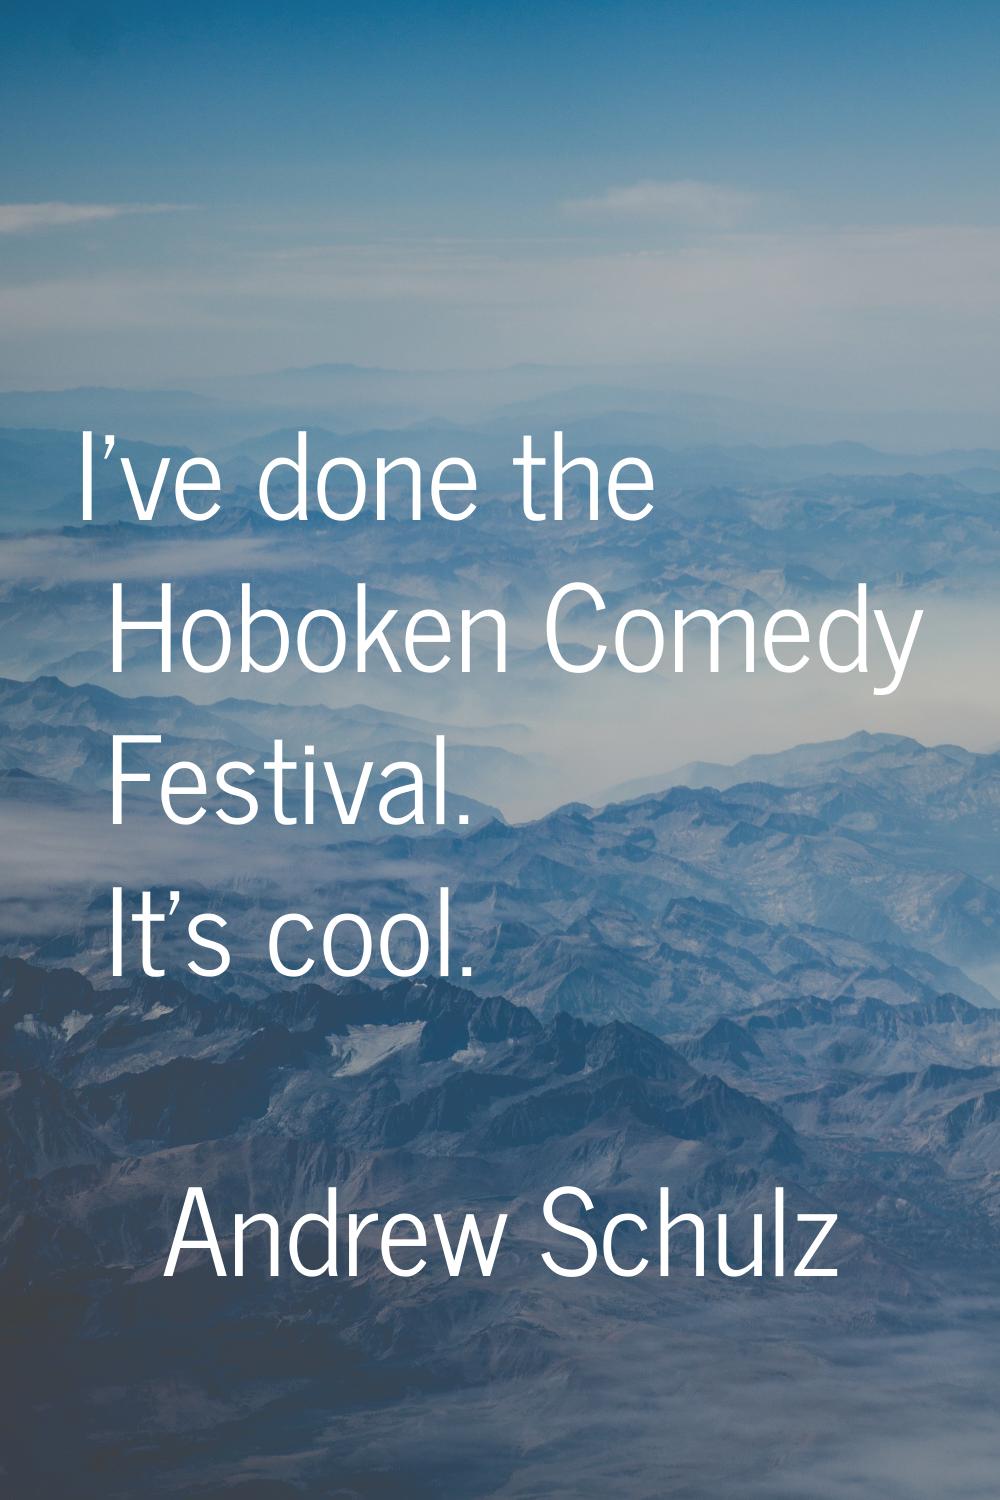 I've done the Hoboken Comedy Festival. It's cool.